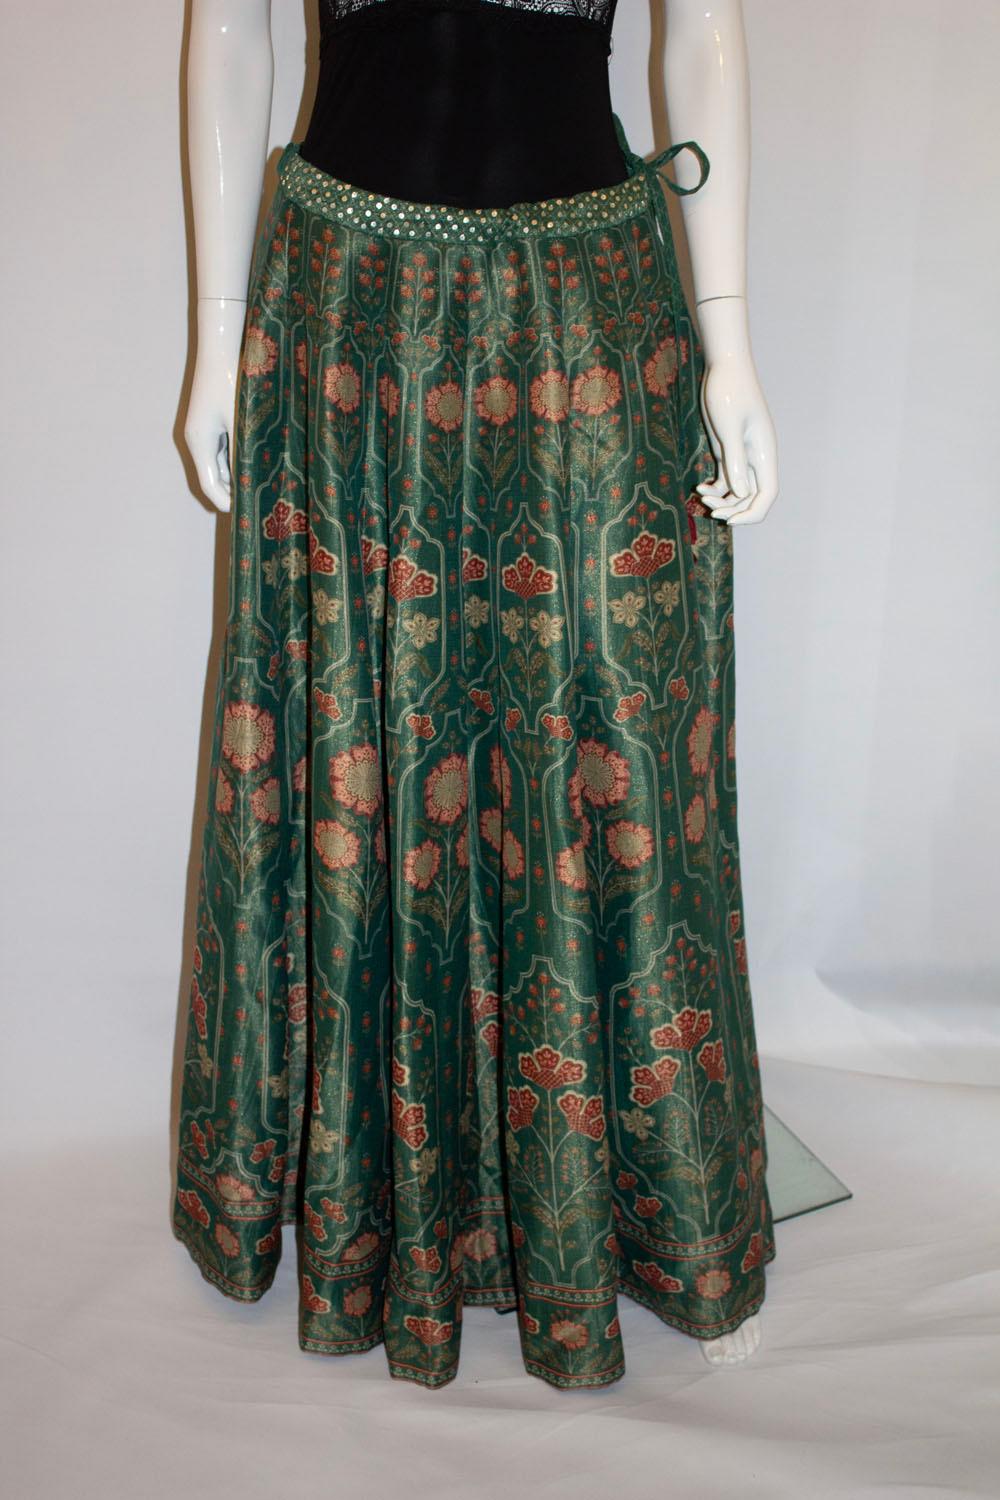 Stunning Green Silk Skirt by Anita Dongre In Good Condition For Sale In London, GB